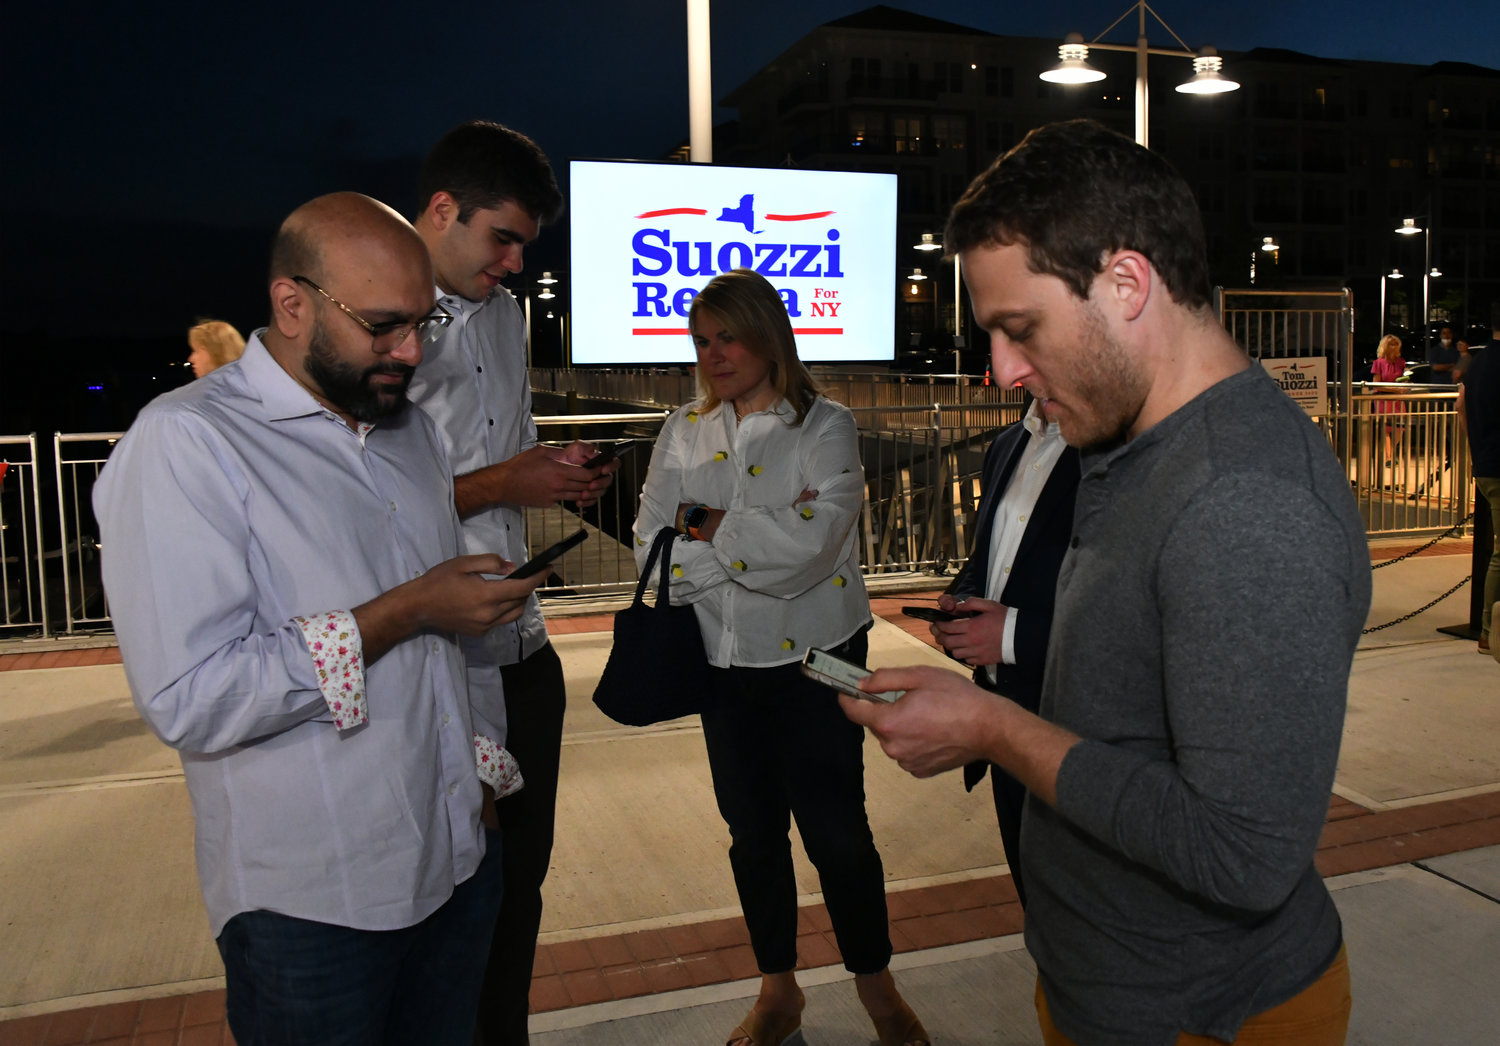 Volunteers from Tom Suozzi’s campaign anxiously checked their phones for the latest poll results.